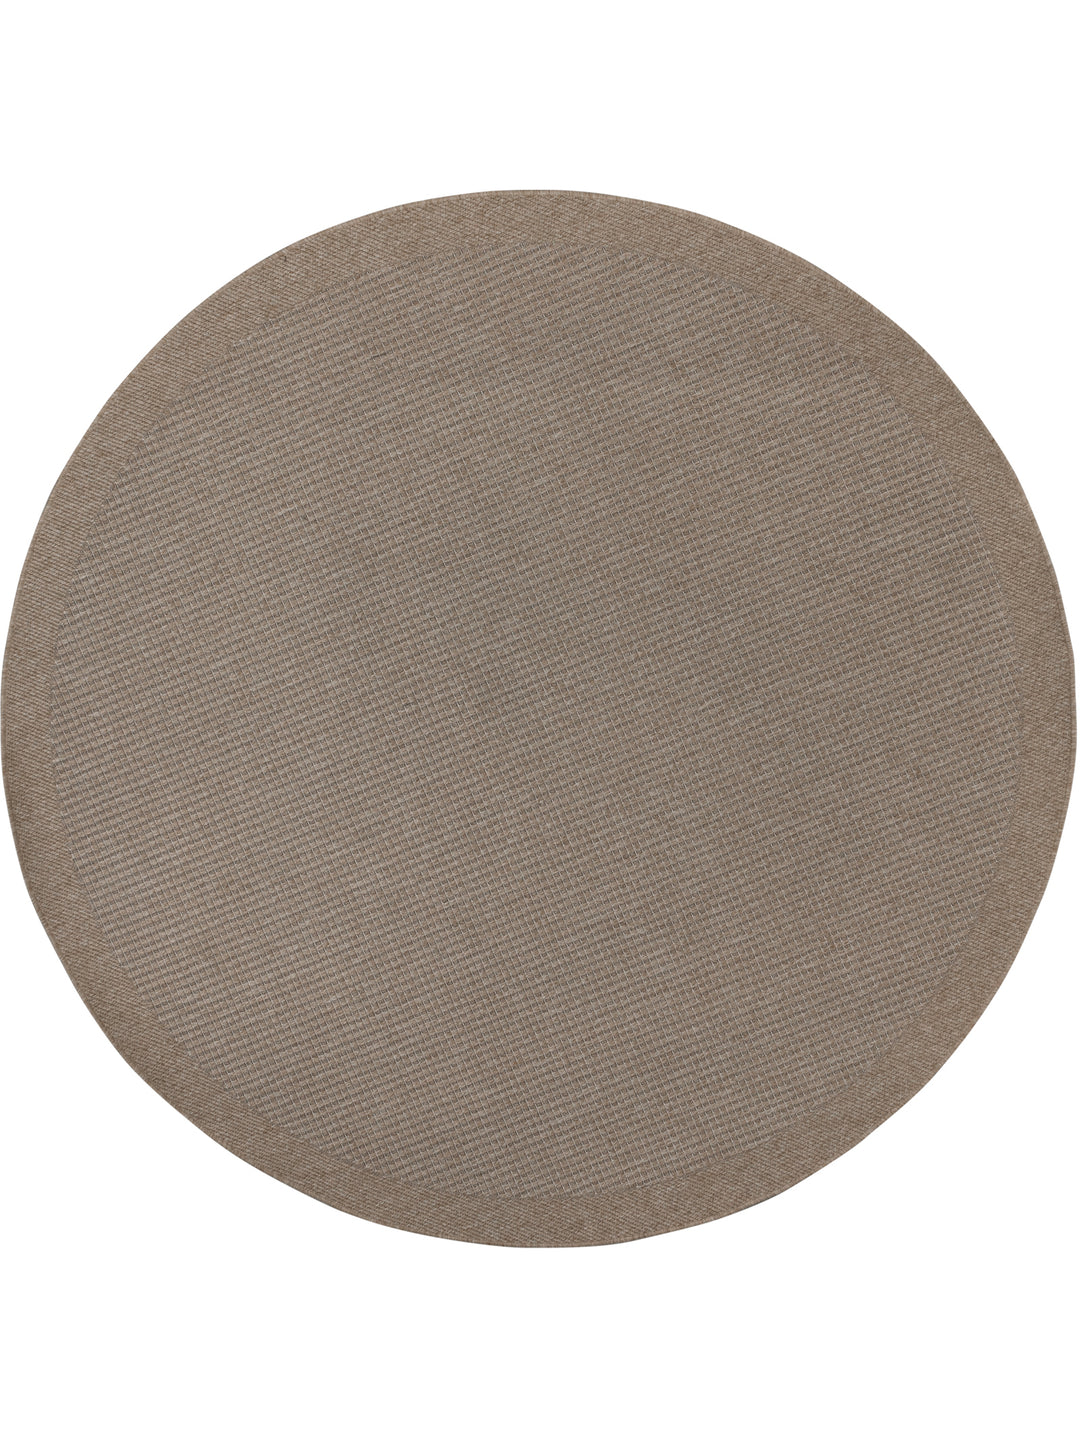 Foreshore Outdoor Round Rug in Seasand